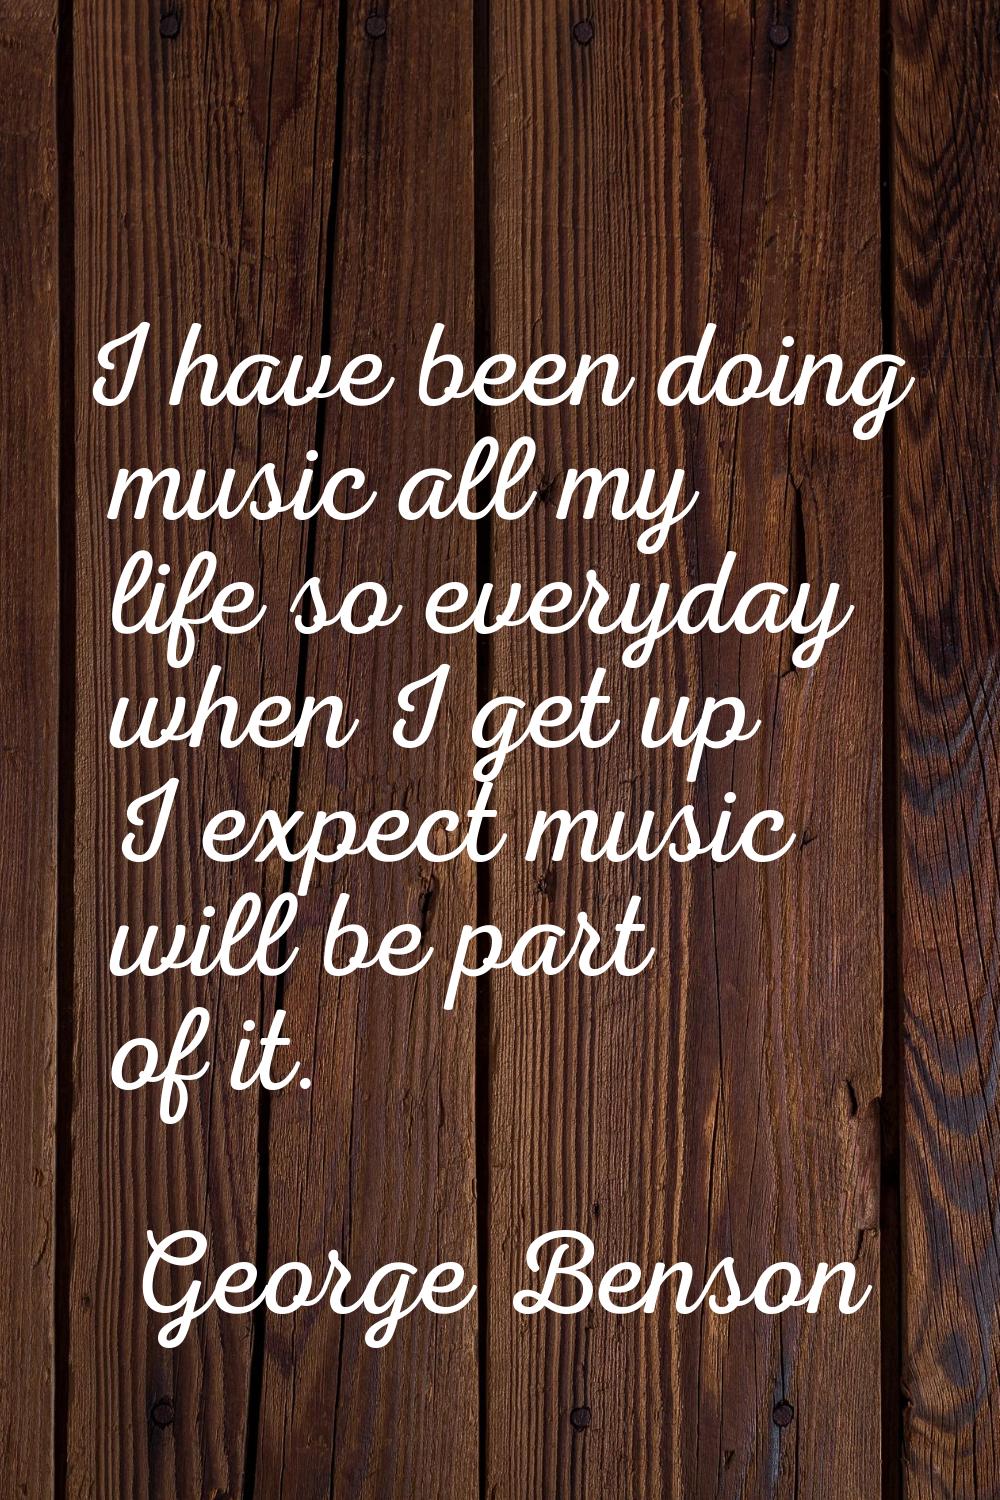 I have been doing music all my life so everyday when I get up I expect music will be part of it.